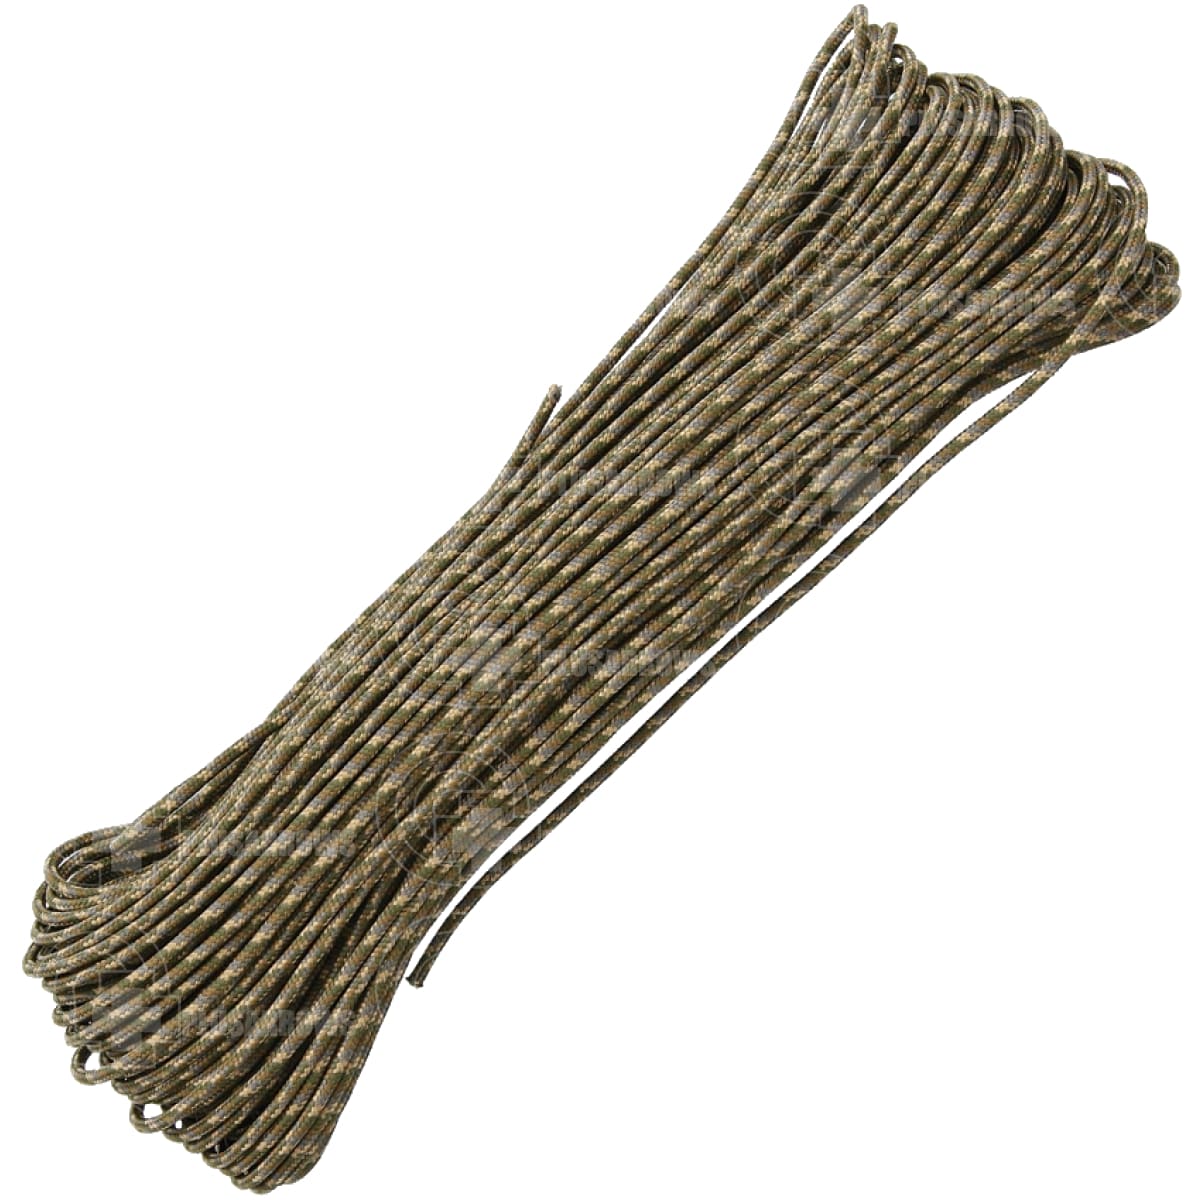 Atwood 275 Tactical Cord